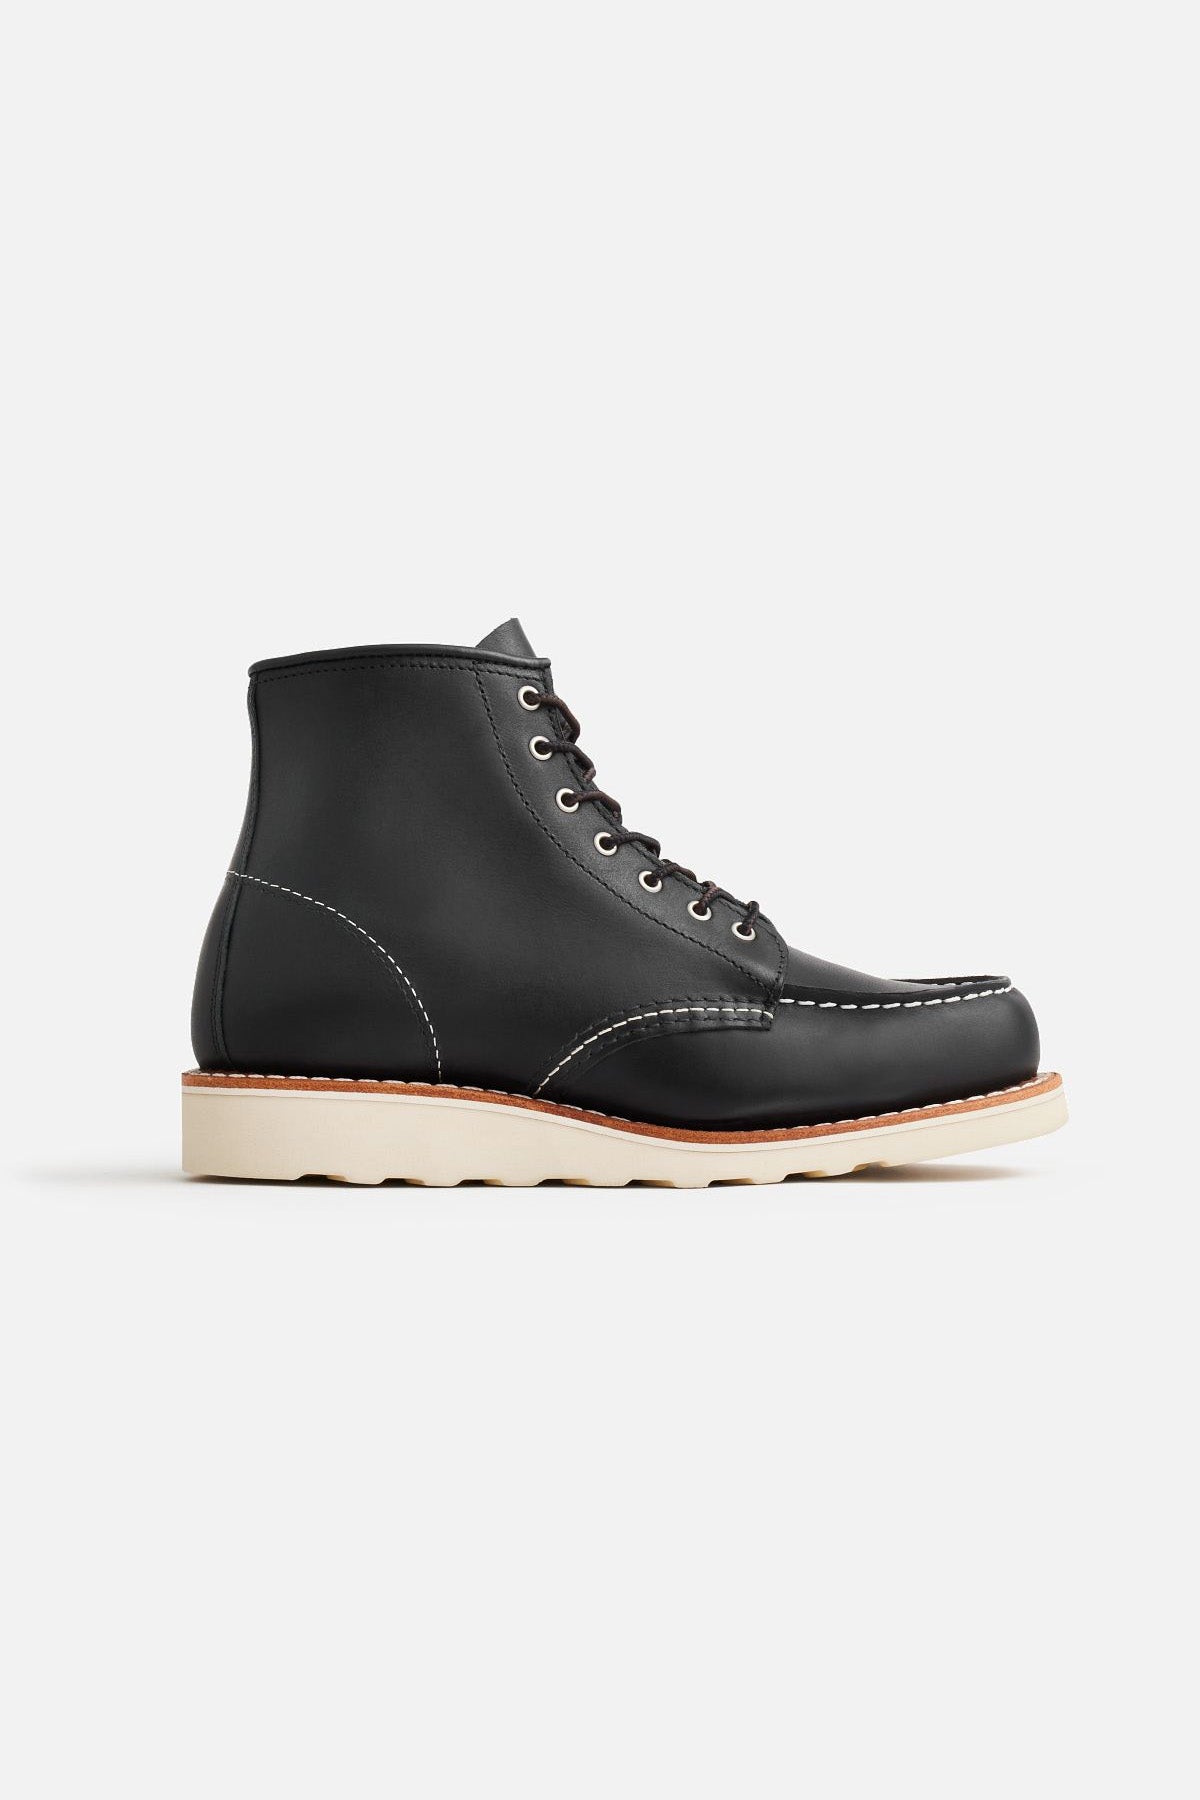 Red Wing - 6 Inch Moc Toe - Black/White - Side